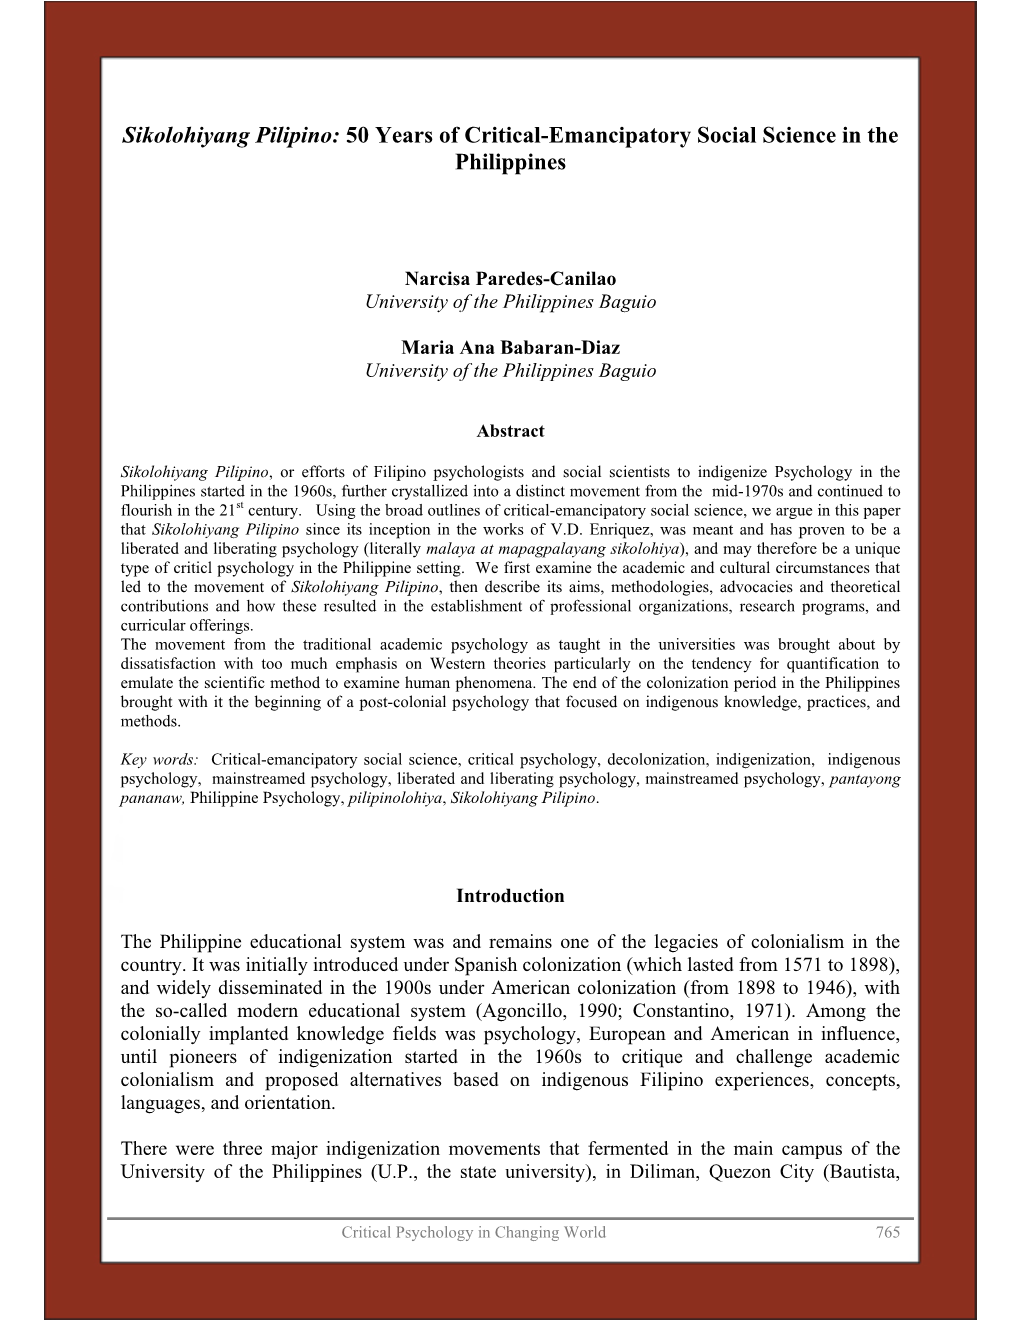 50 Years of Critical-Emancipatory Social Science in the Philippines